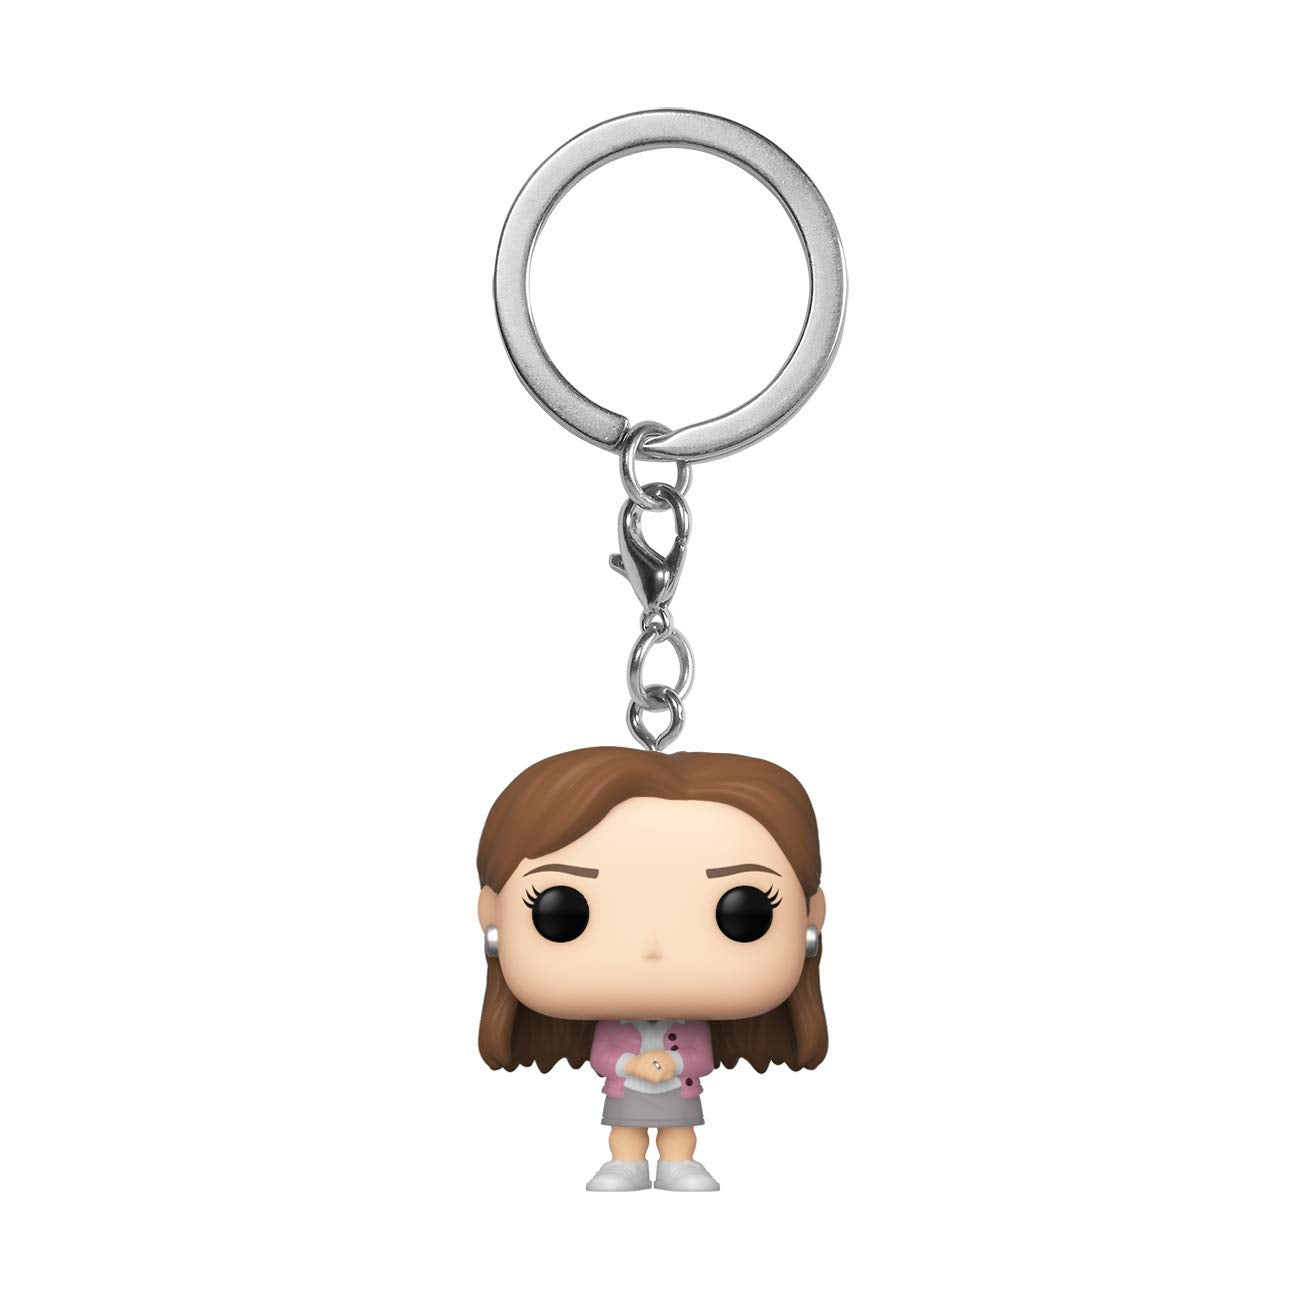 Funko Pocket POP! Keychain The Office Pam Beesly